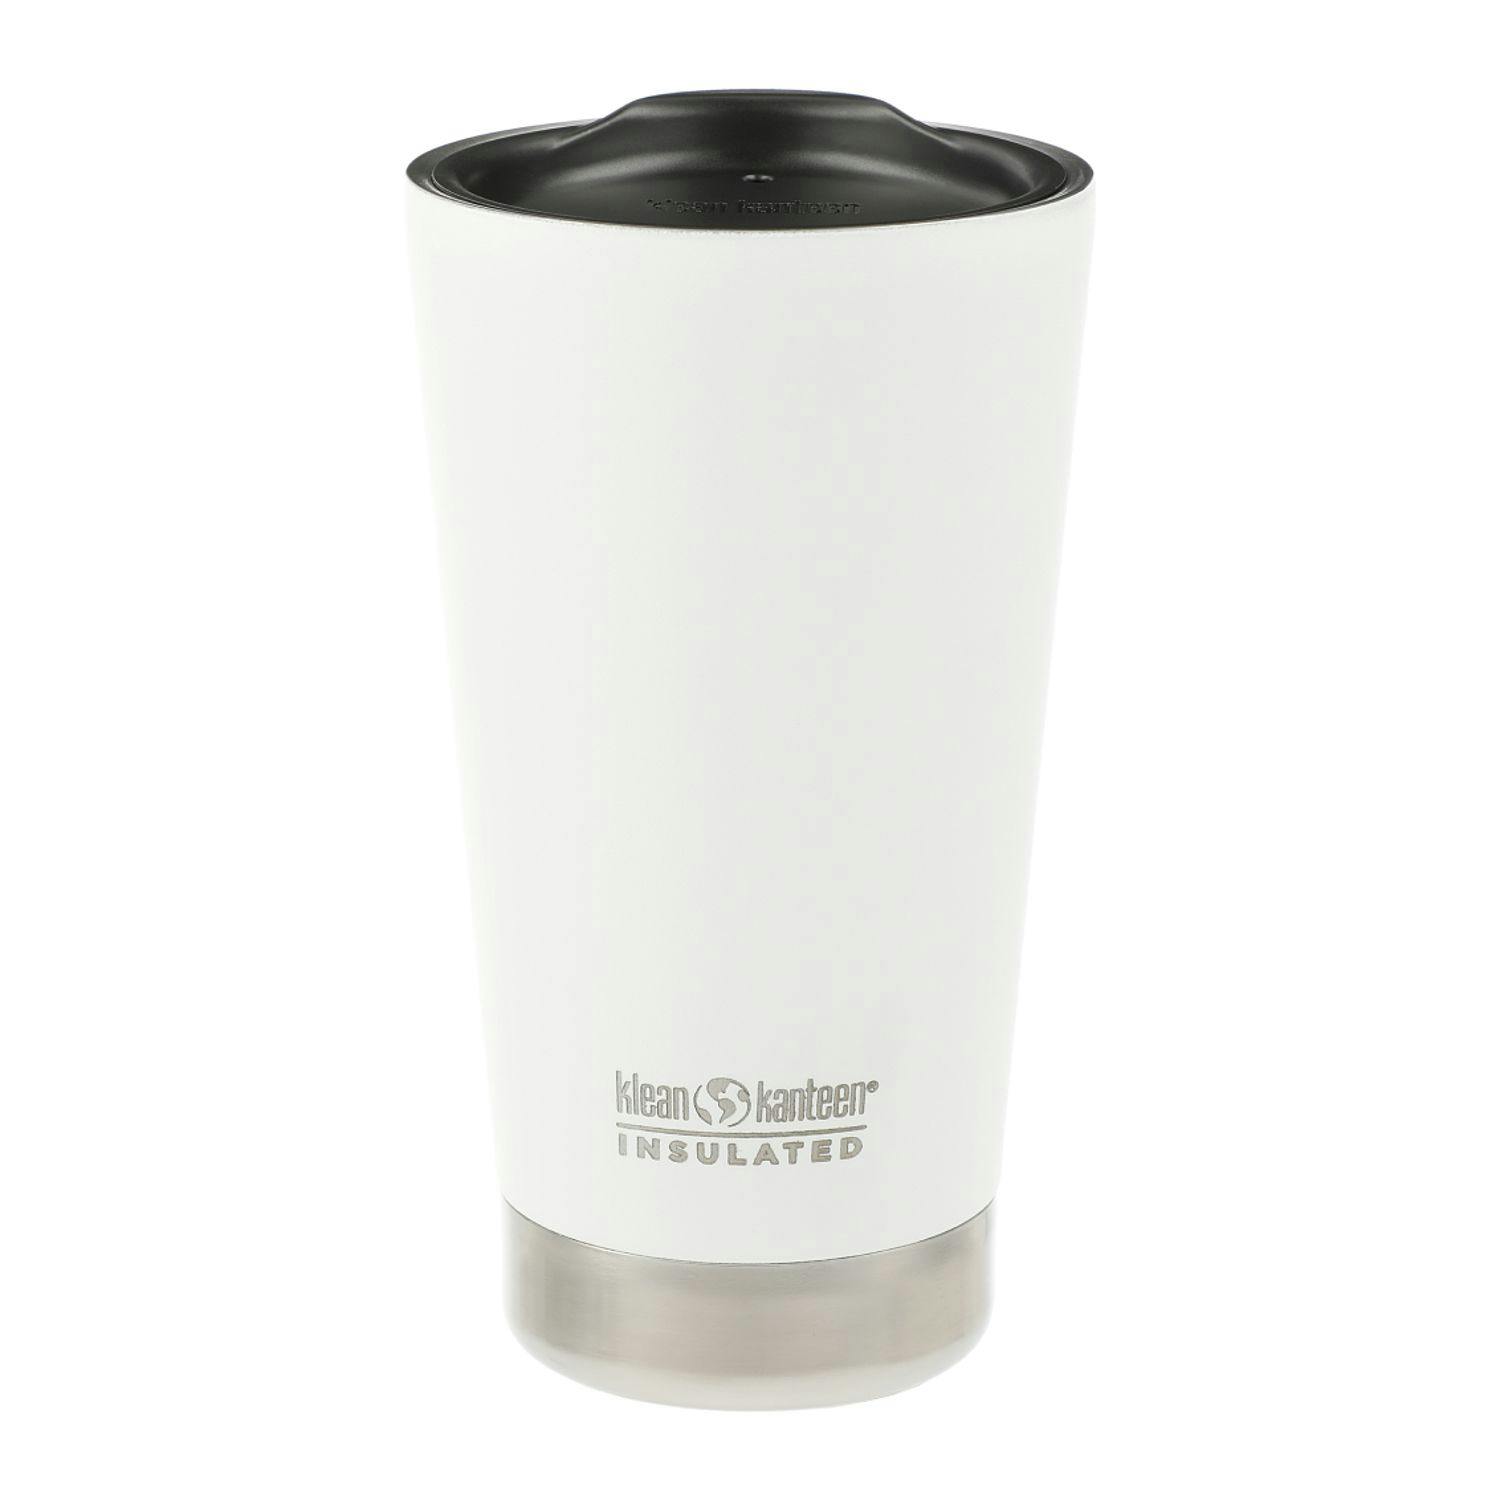 Klean Kanteen Eco Insulated Tumbler 16oz - additional Image 1